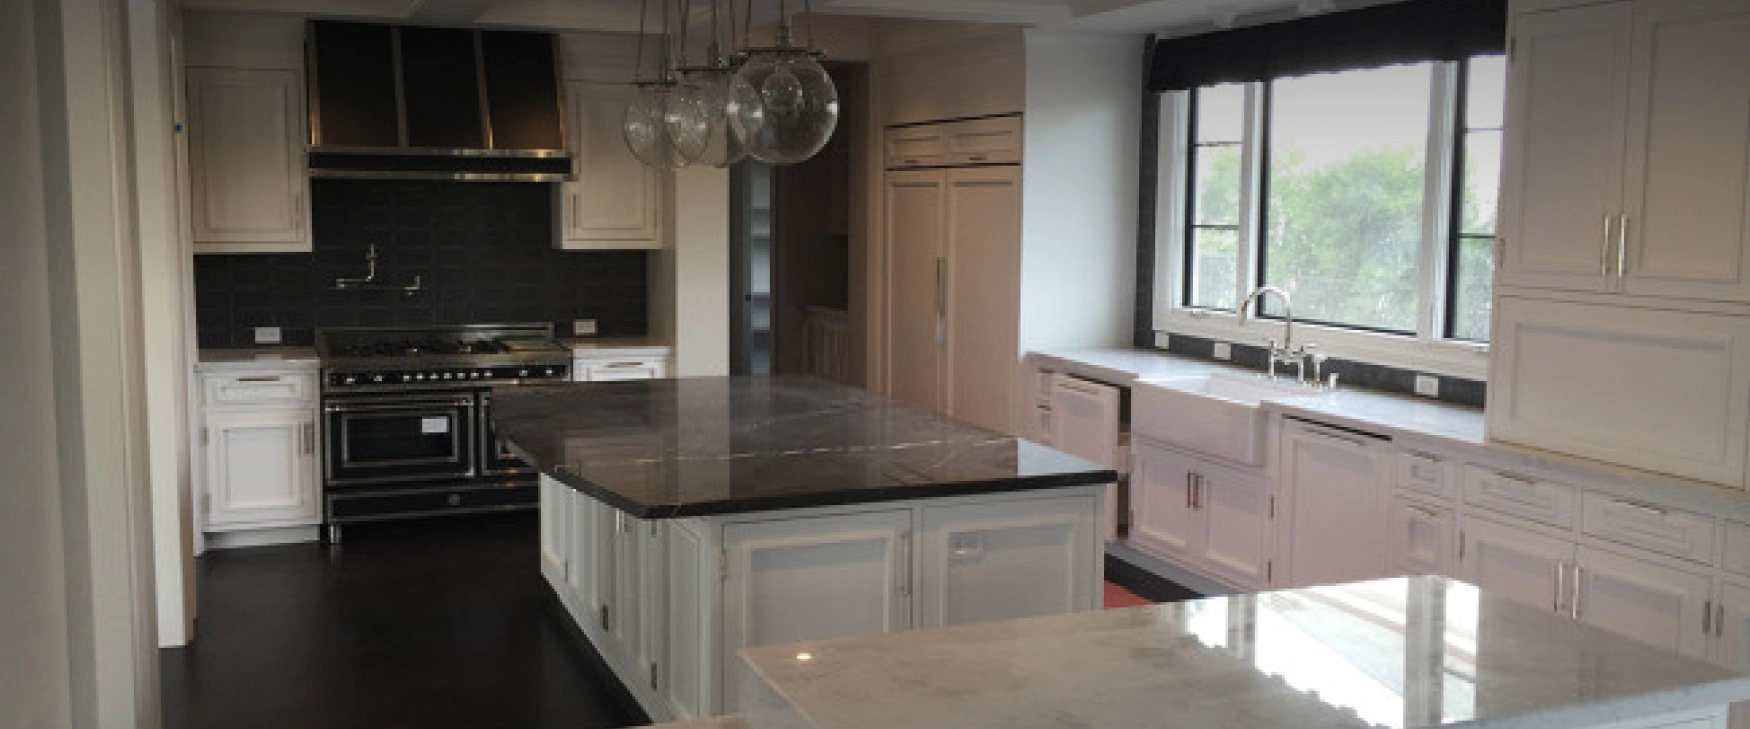 countertop installed in a kitchen